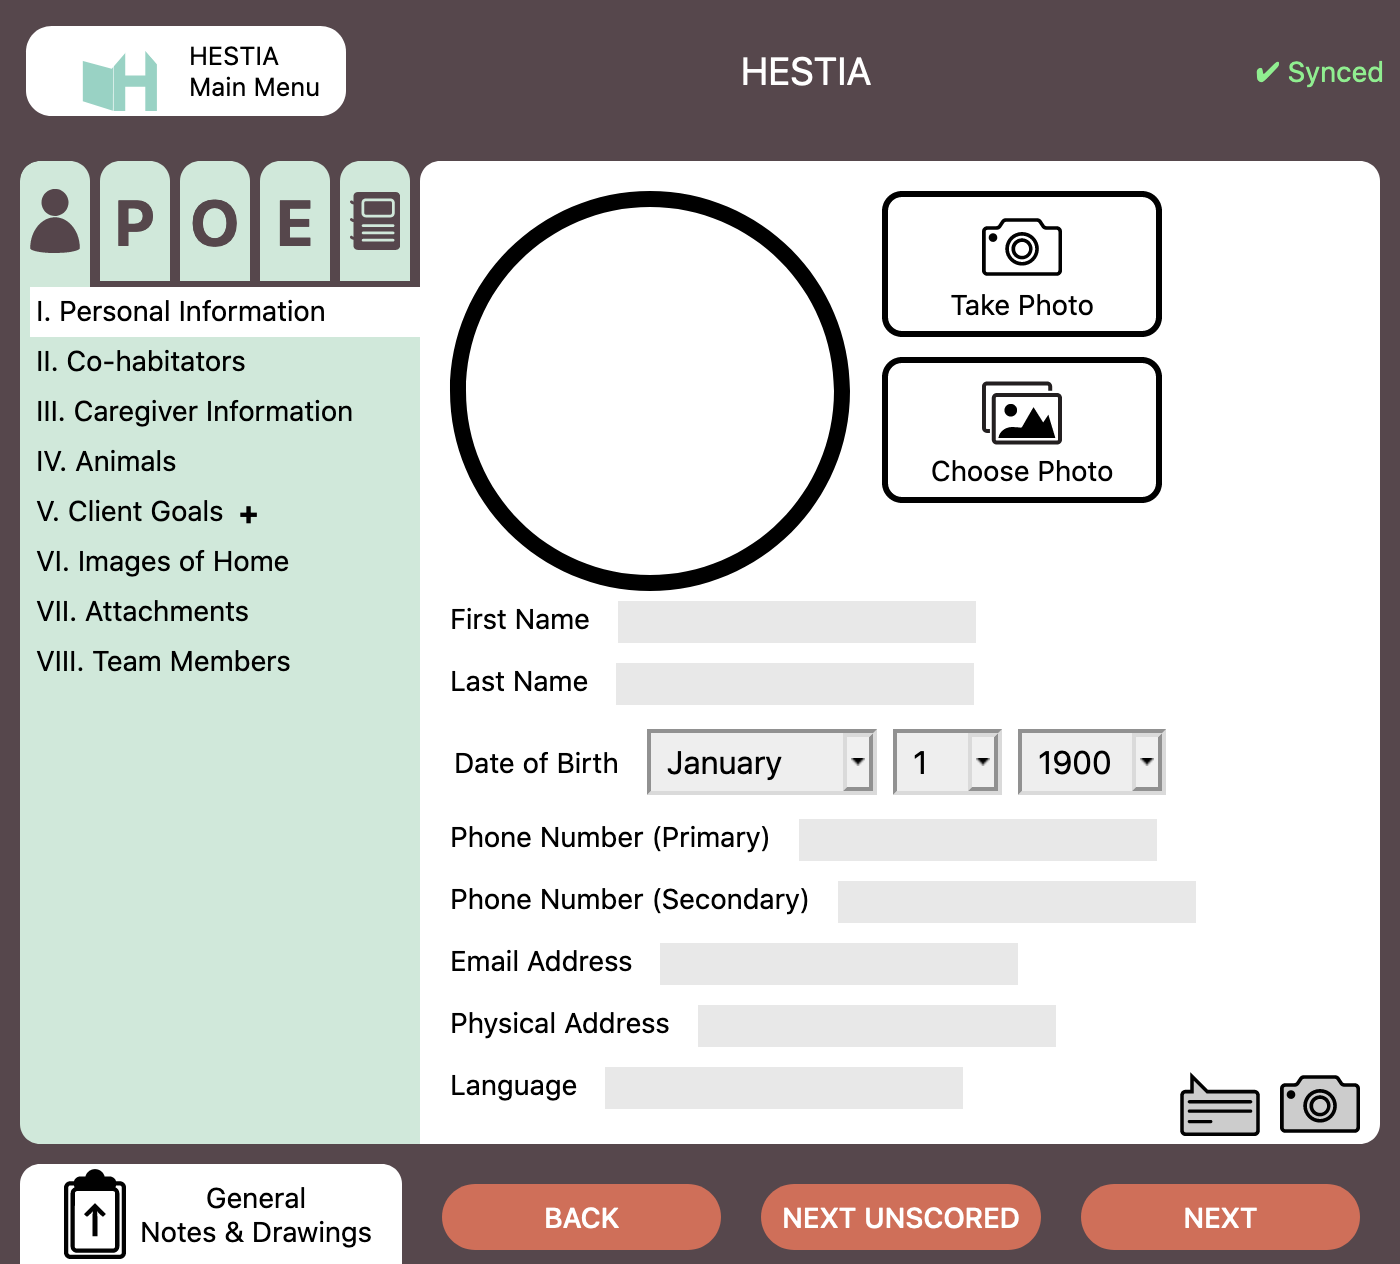 Screenshot of HESTIA profile information page for the users to provide personal information